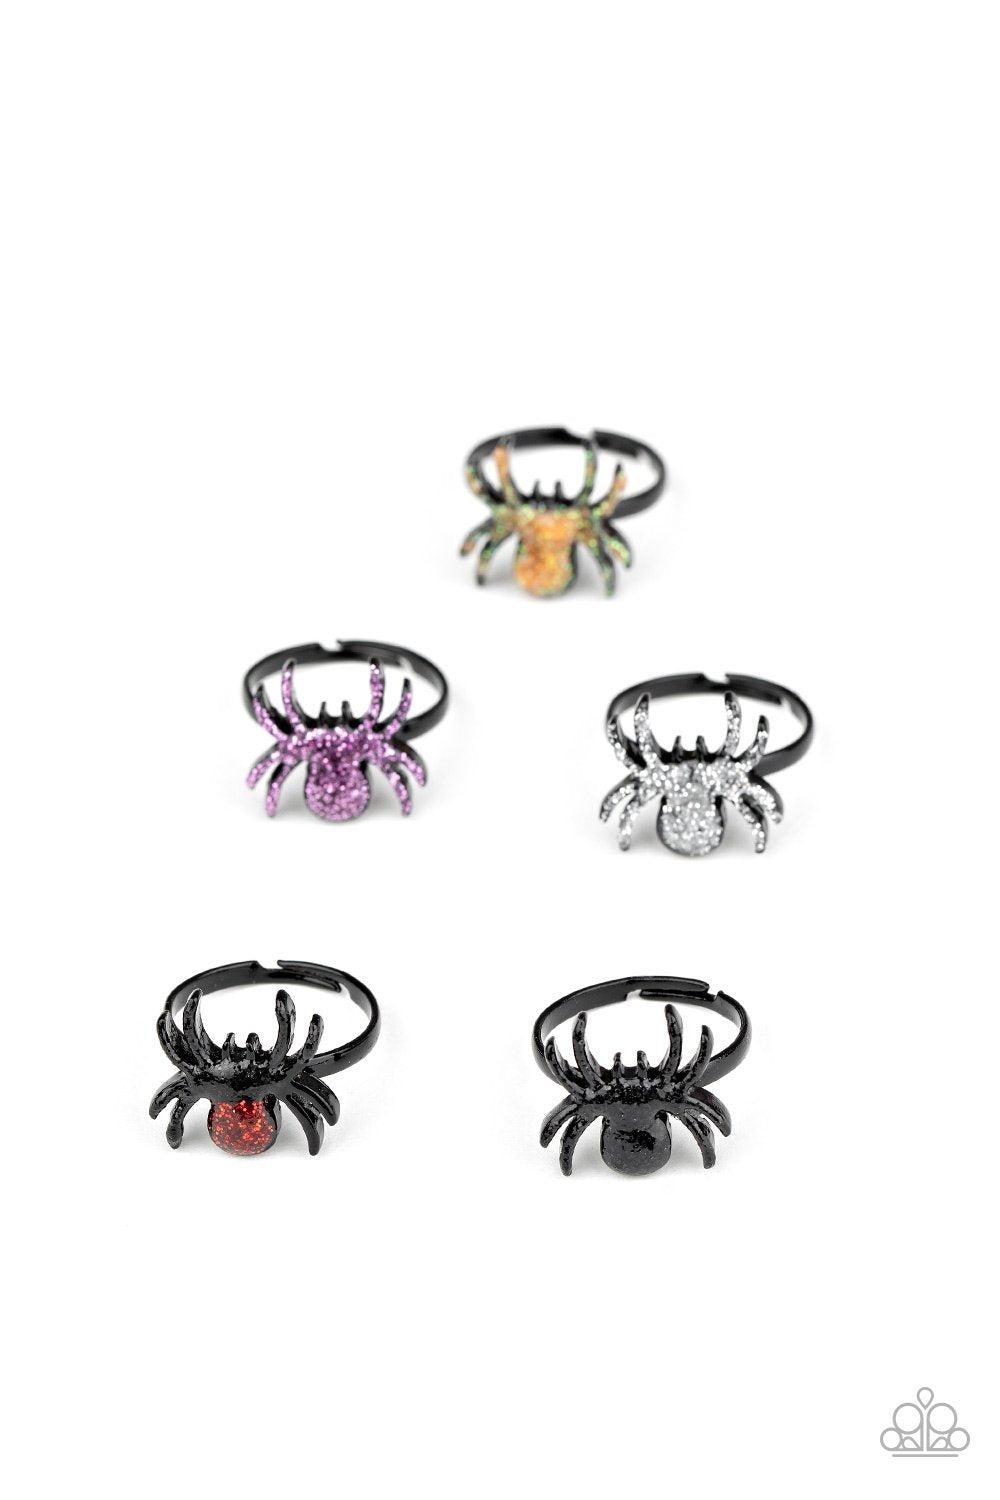 Halloween Themed Starlet Shimmer Children's Spider Rings 2020 - Paparazzi Accessories (set of 5)-CarasShop.com - $5 Jewelry by Cara Jewels